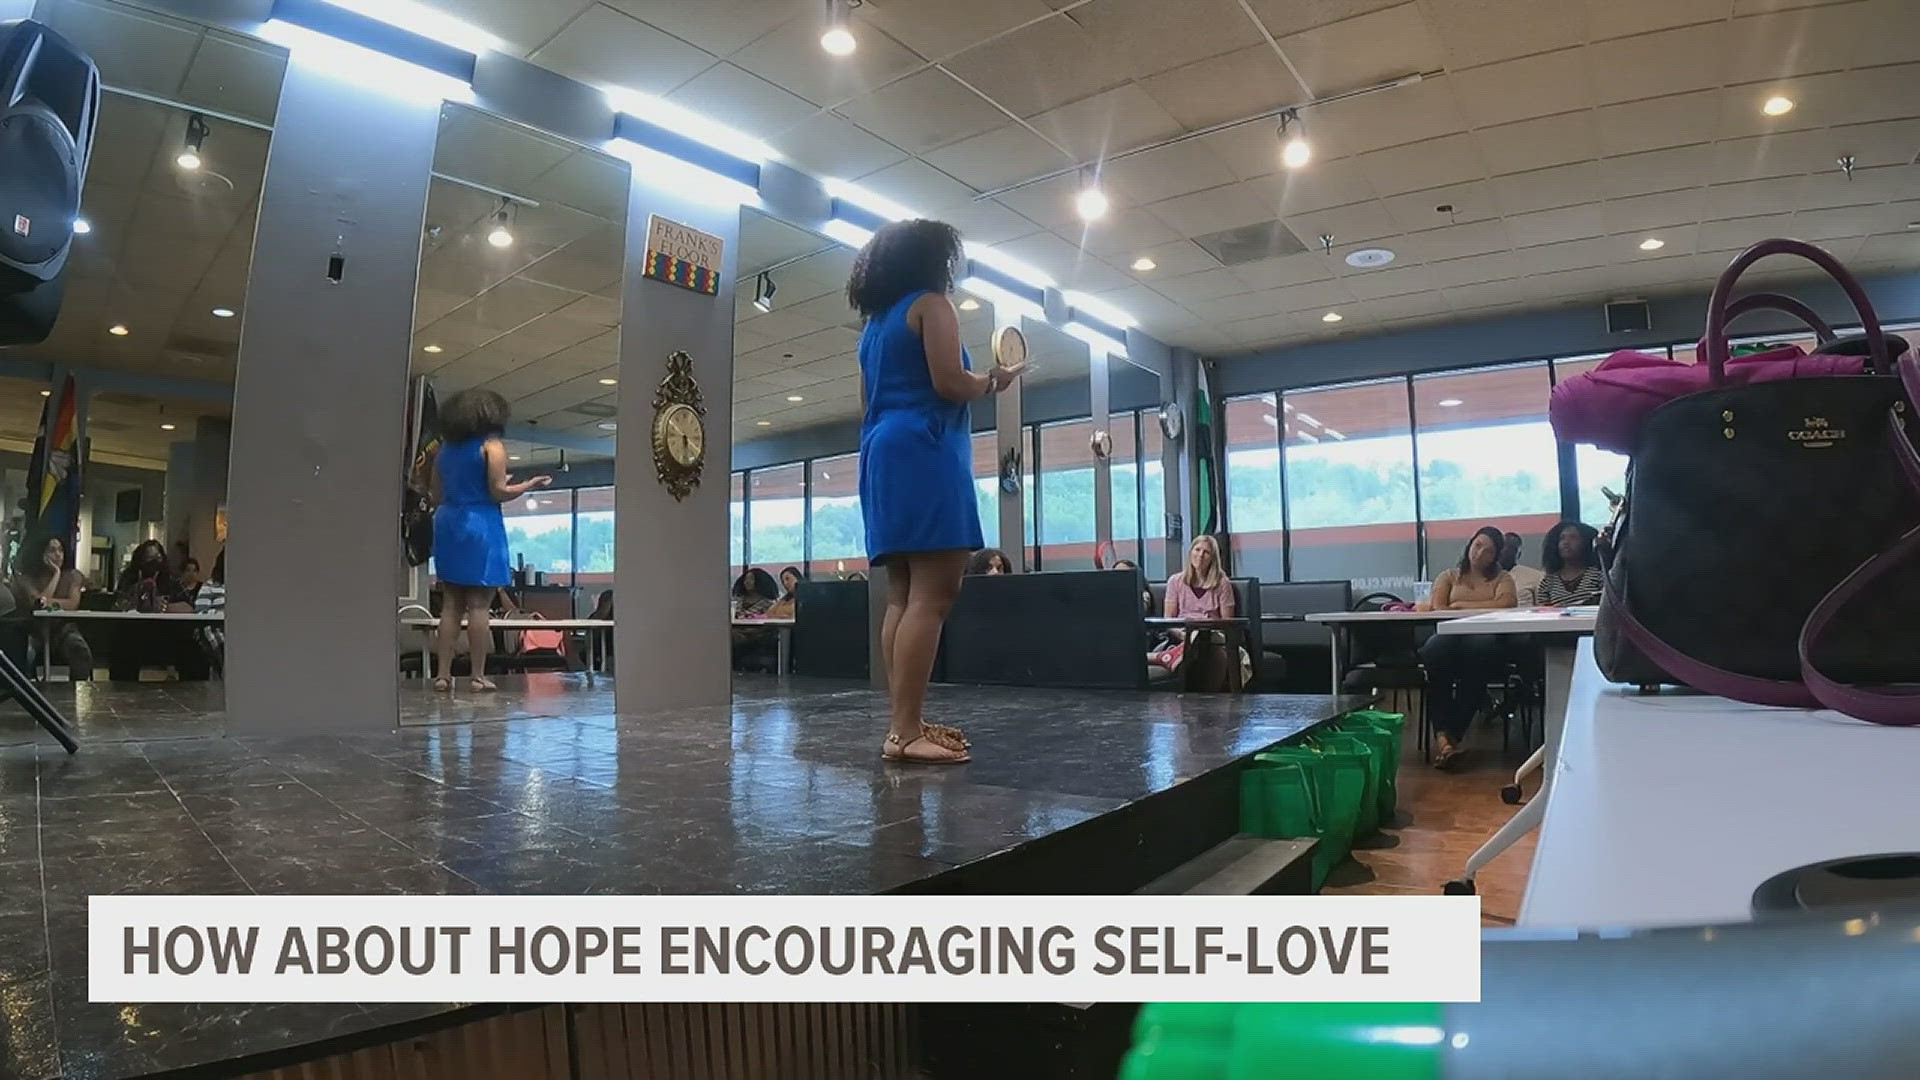 The organization hosted 'Feel Beautiful In Your Skin' to help people build confidence